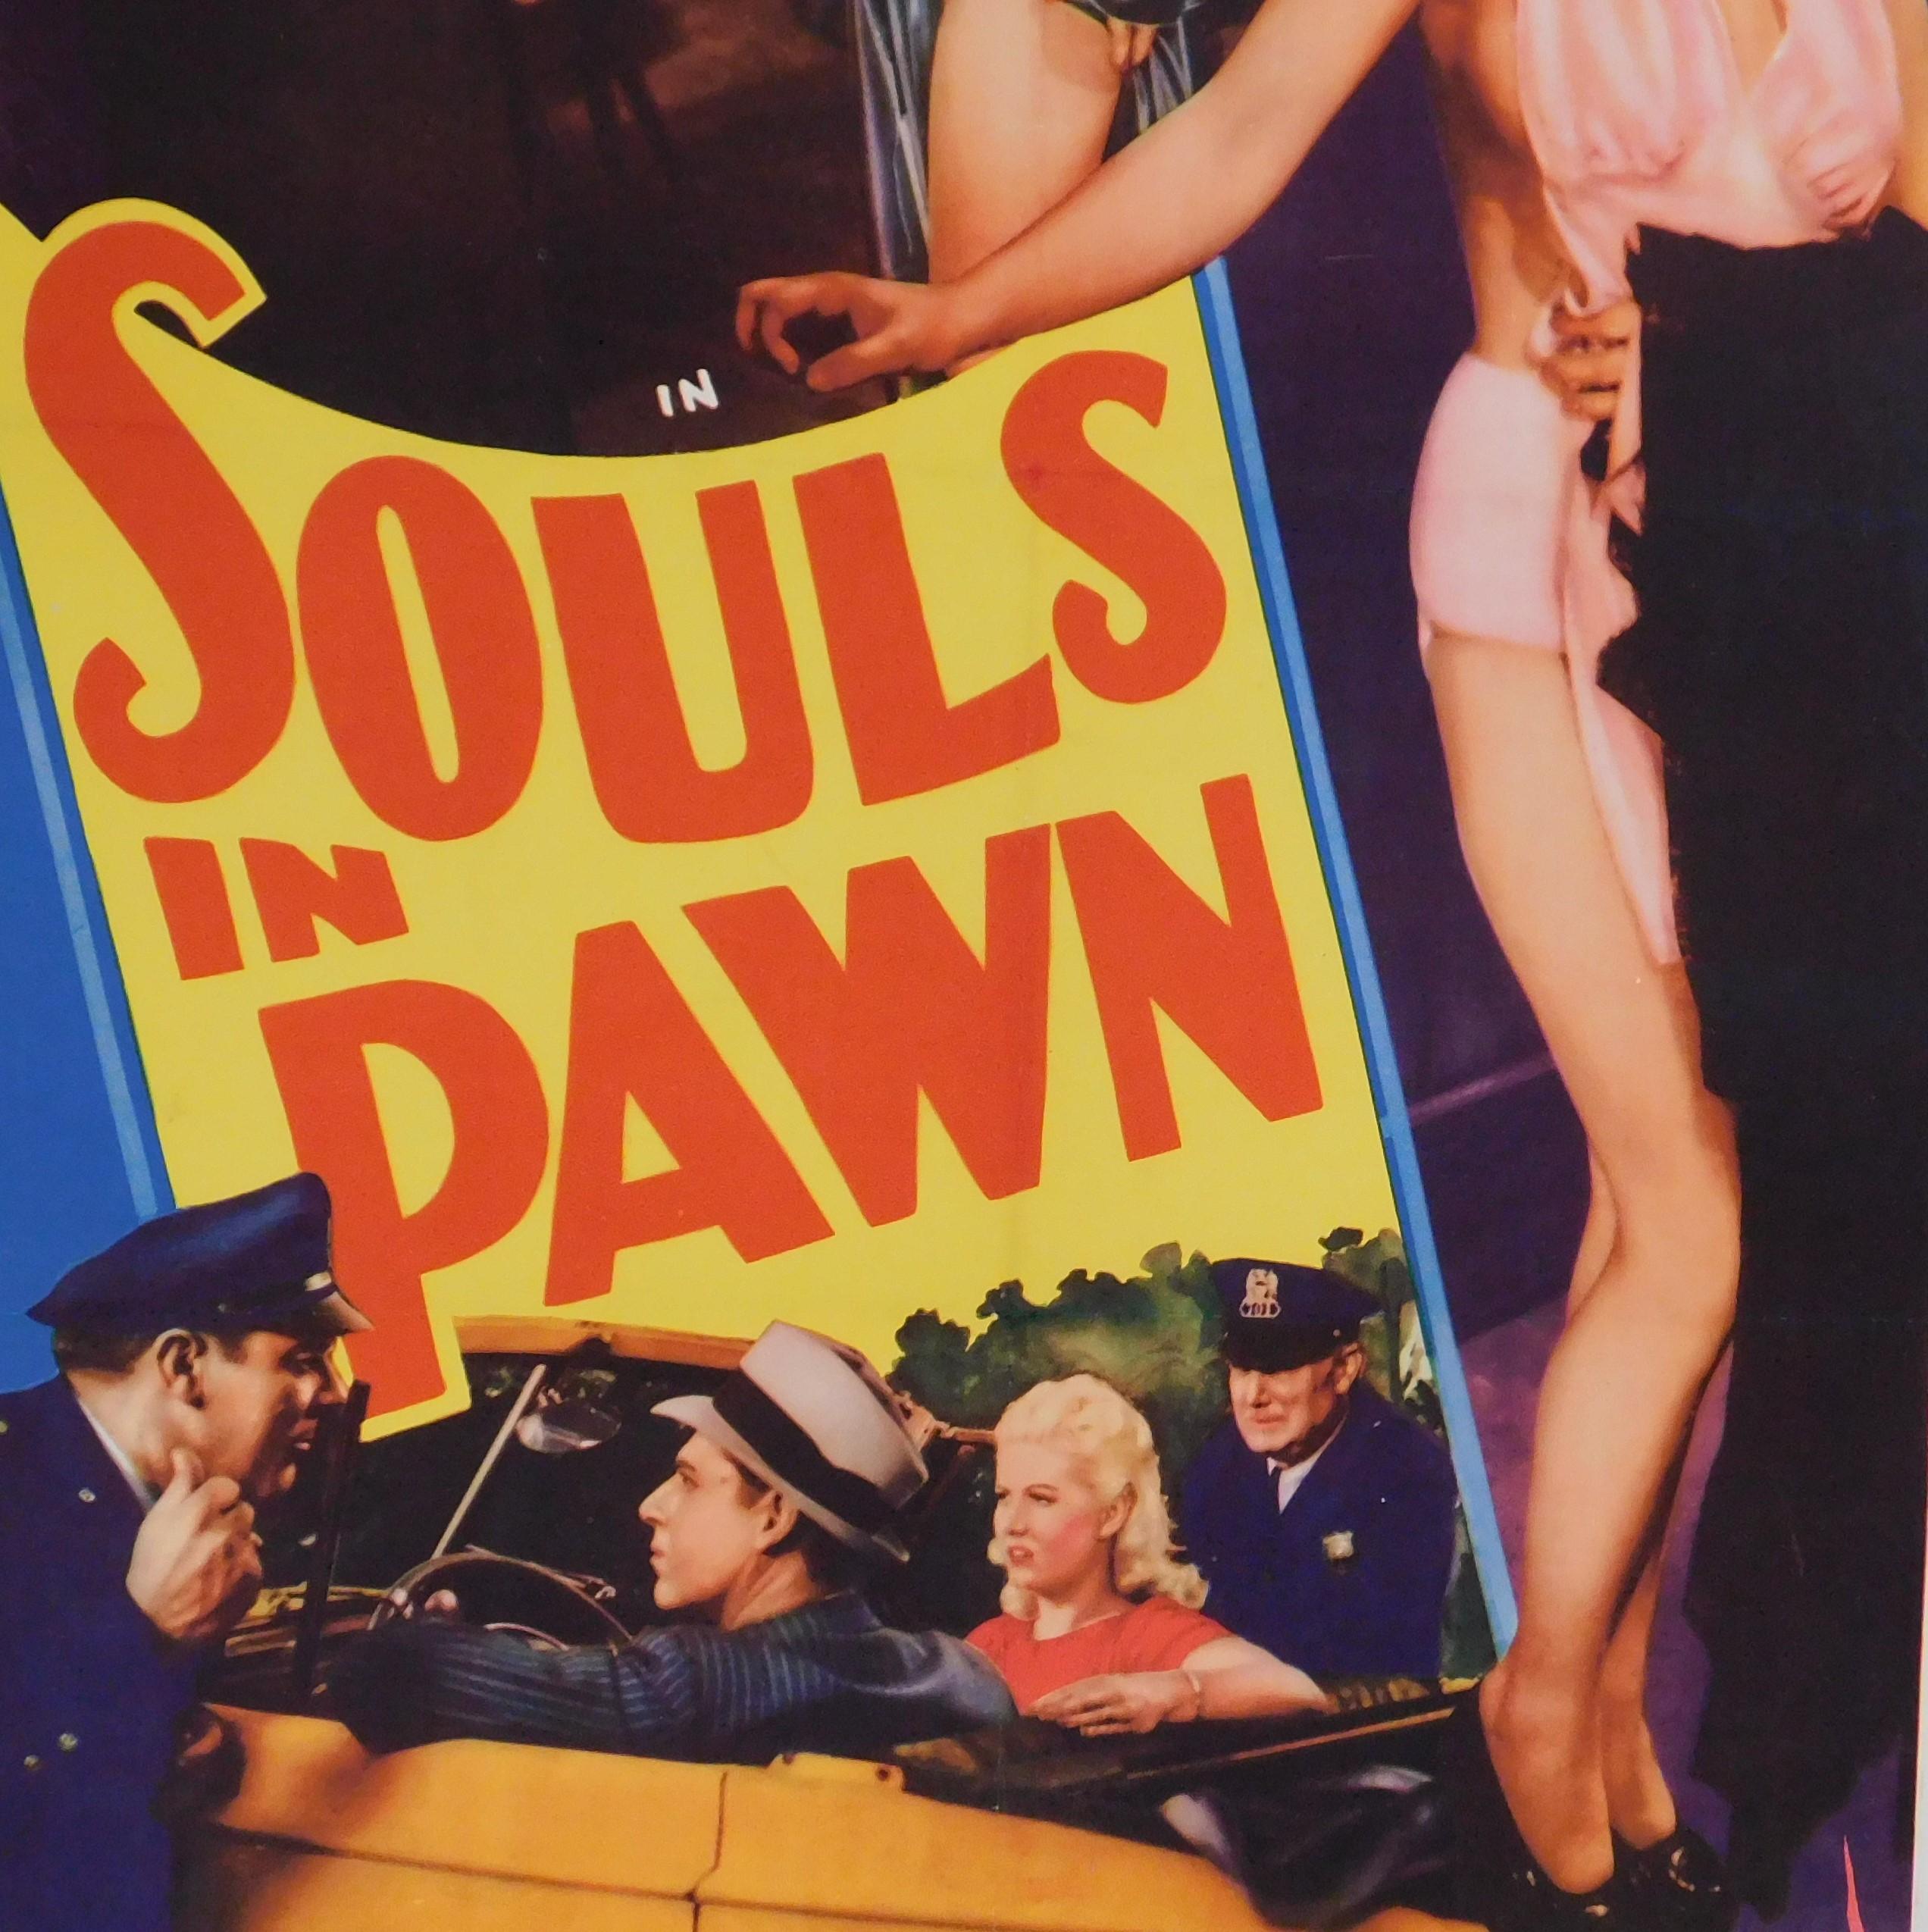 Souls in Pawn 1940 Original Linen Backed Theatrical Poster Burlesque One-Sheet For Sale 2